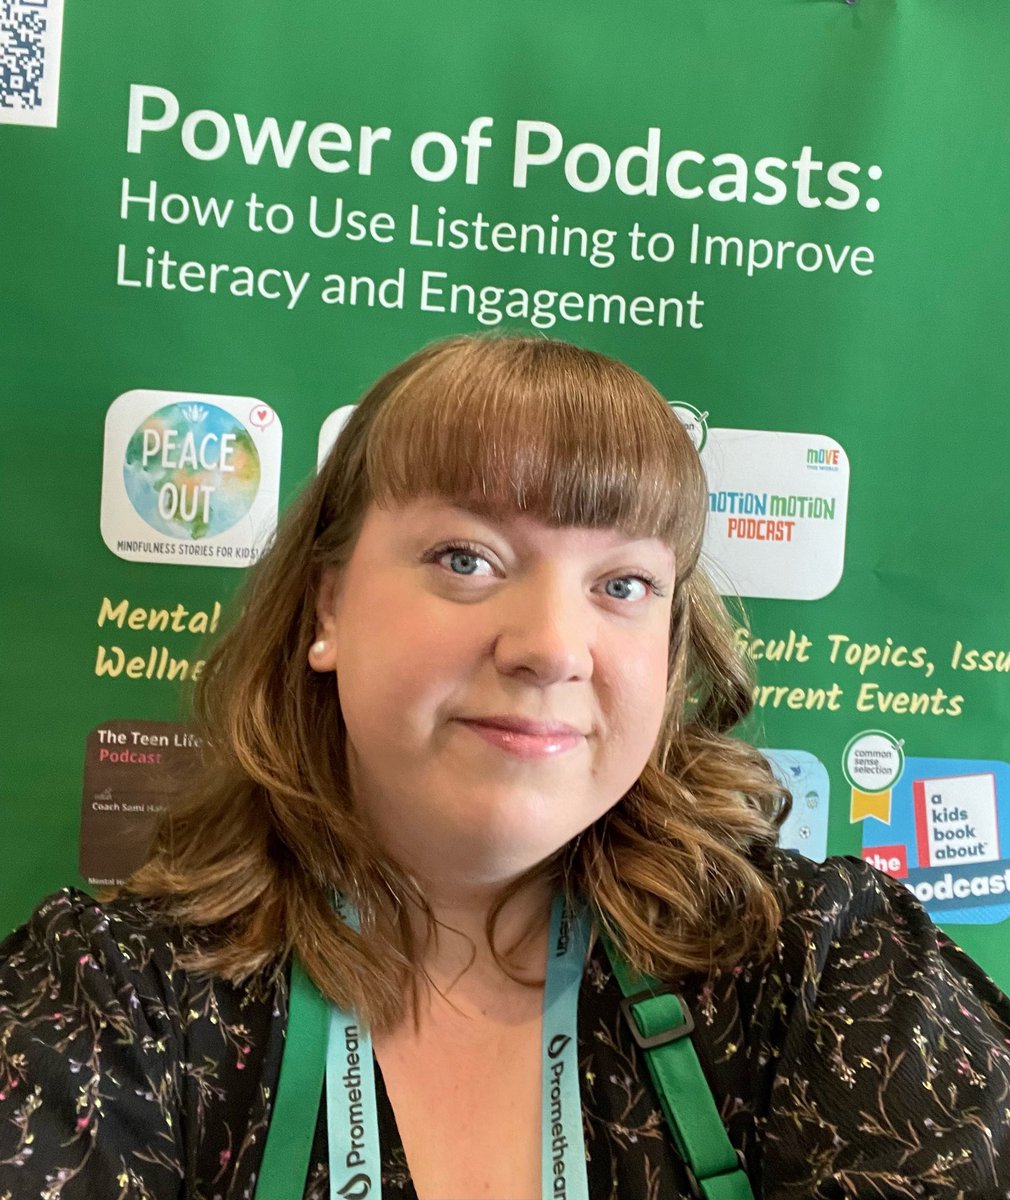 Up early and ready for my very first poster session ever! Wish me luck! As much as I present, I still get nervous every single time! In the Terrace Ballroom area at #ISTELive? Come by and say hi - I’ve got stickers! #Podcasts #PodcastsInTheClassroom